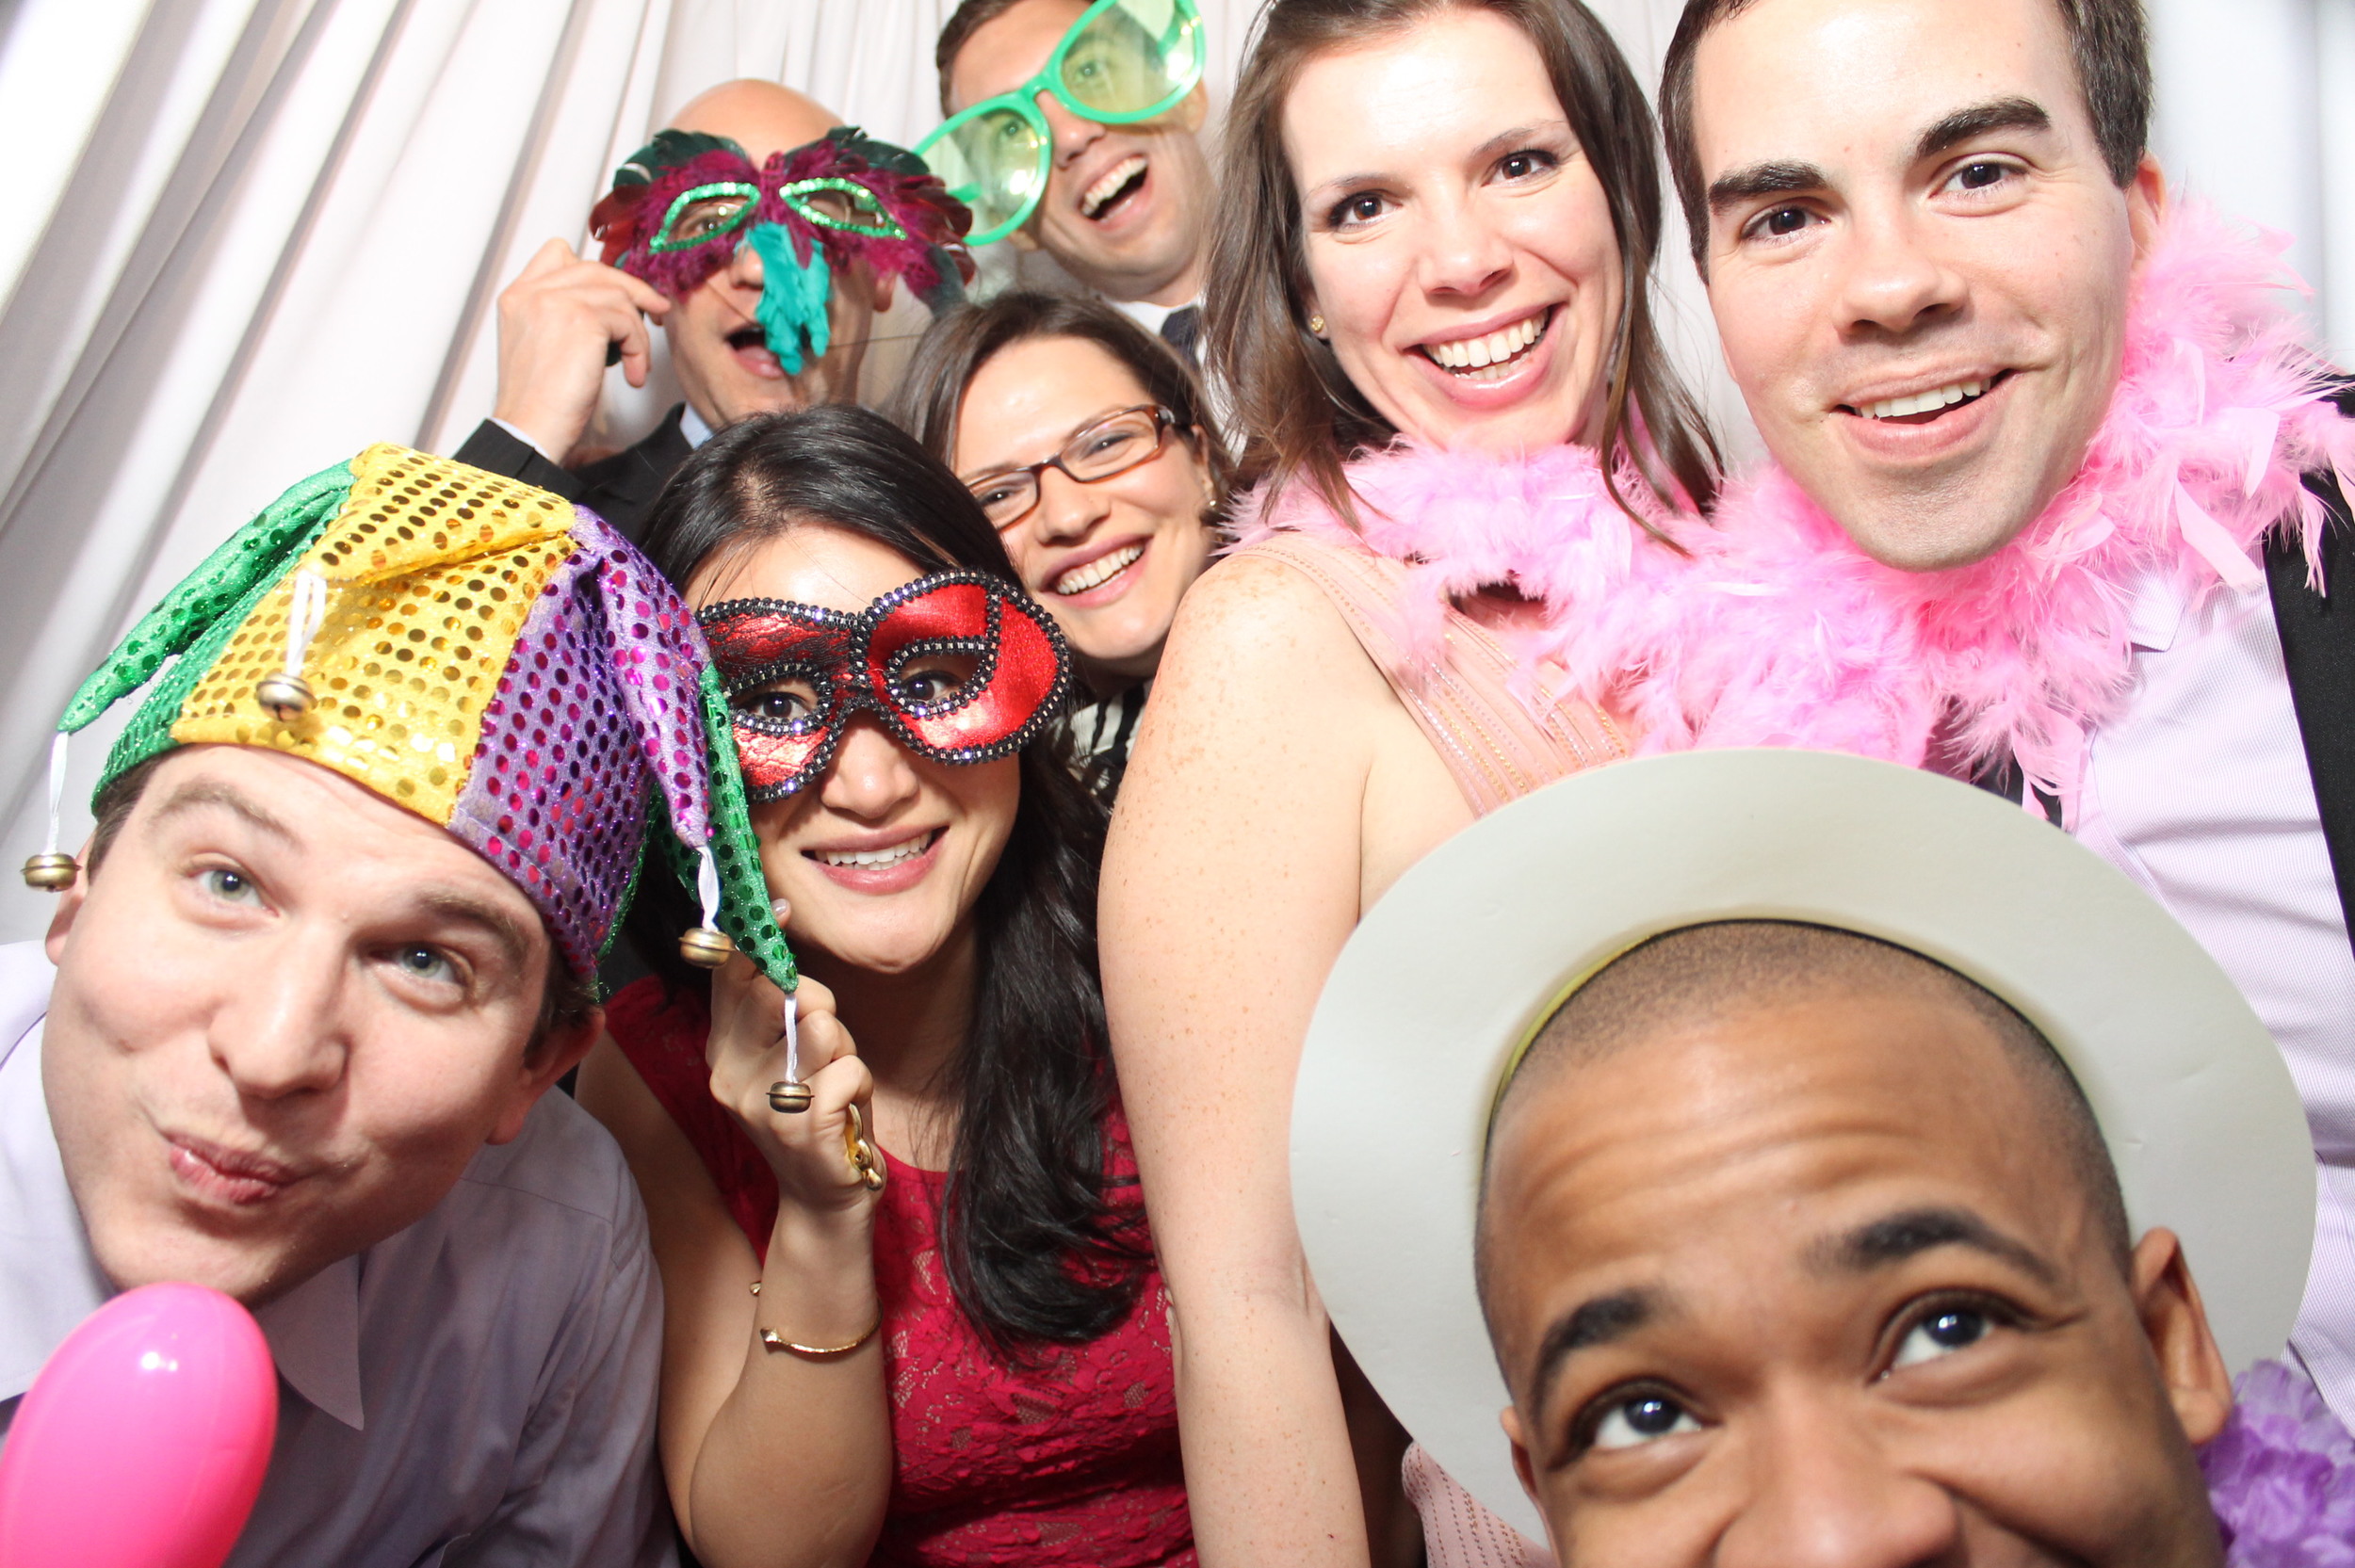 Snapshot Photobooths at The Florentine Gardens in Riverdale, New Jersey